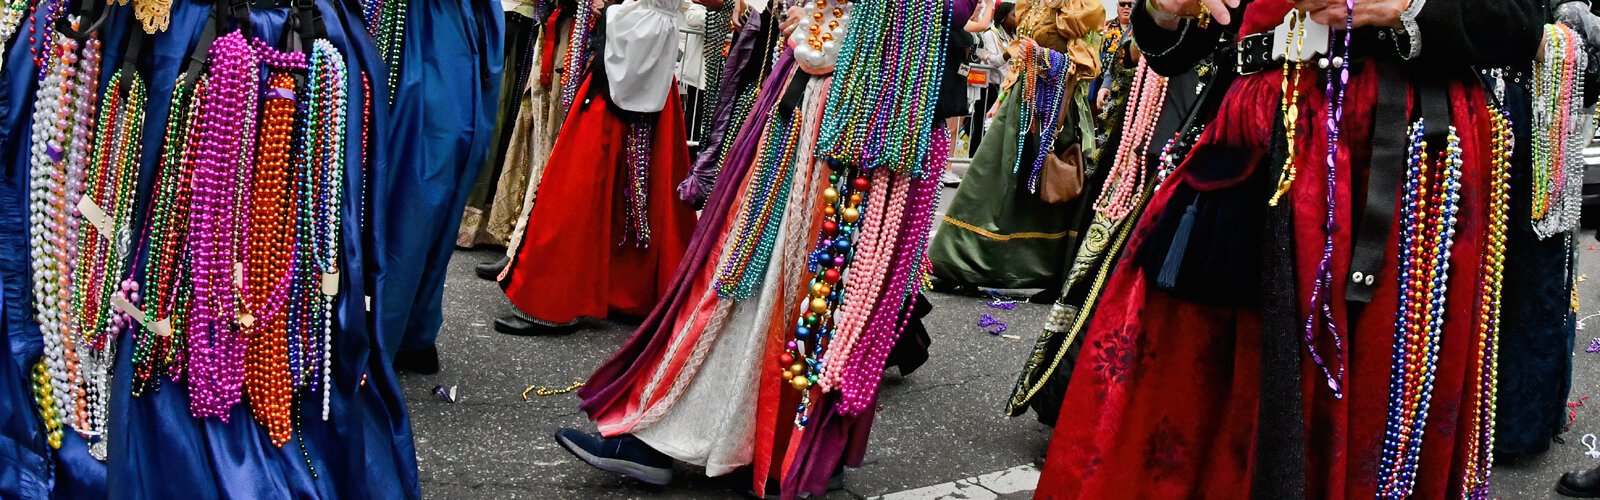 Beads, beads and more beads, that’s the name of the game during the 2023 Seminole Hard Rock Gasparilla Pirate Fest in Tampa on Saturday, January 28, 2023.